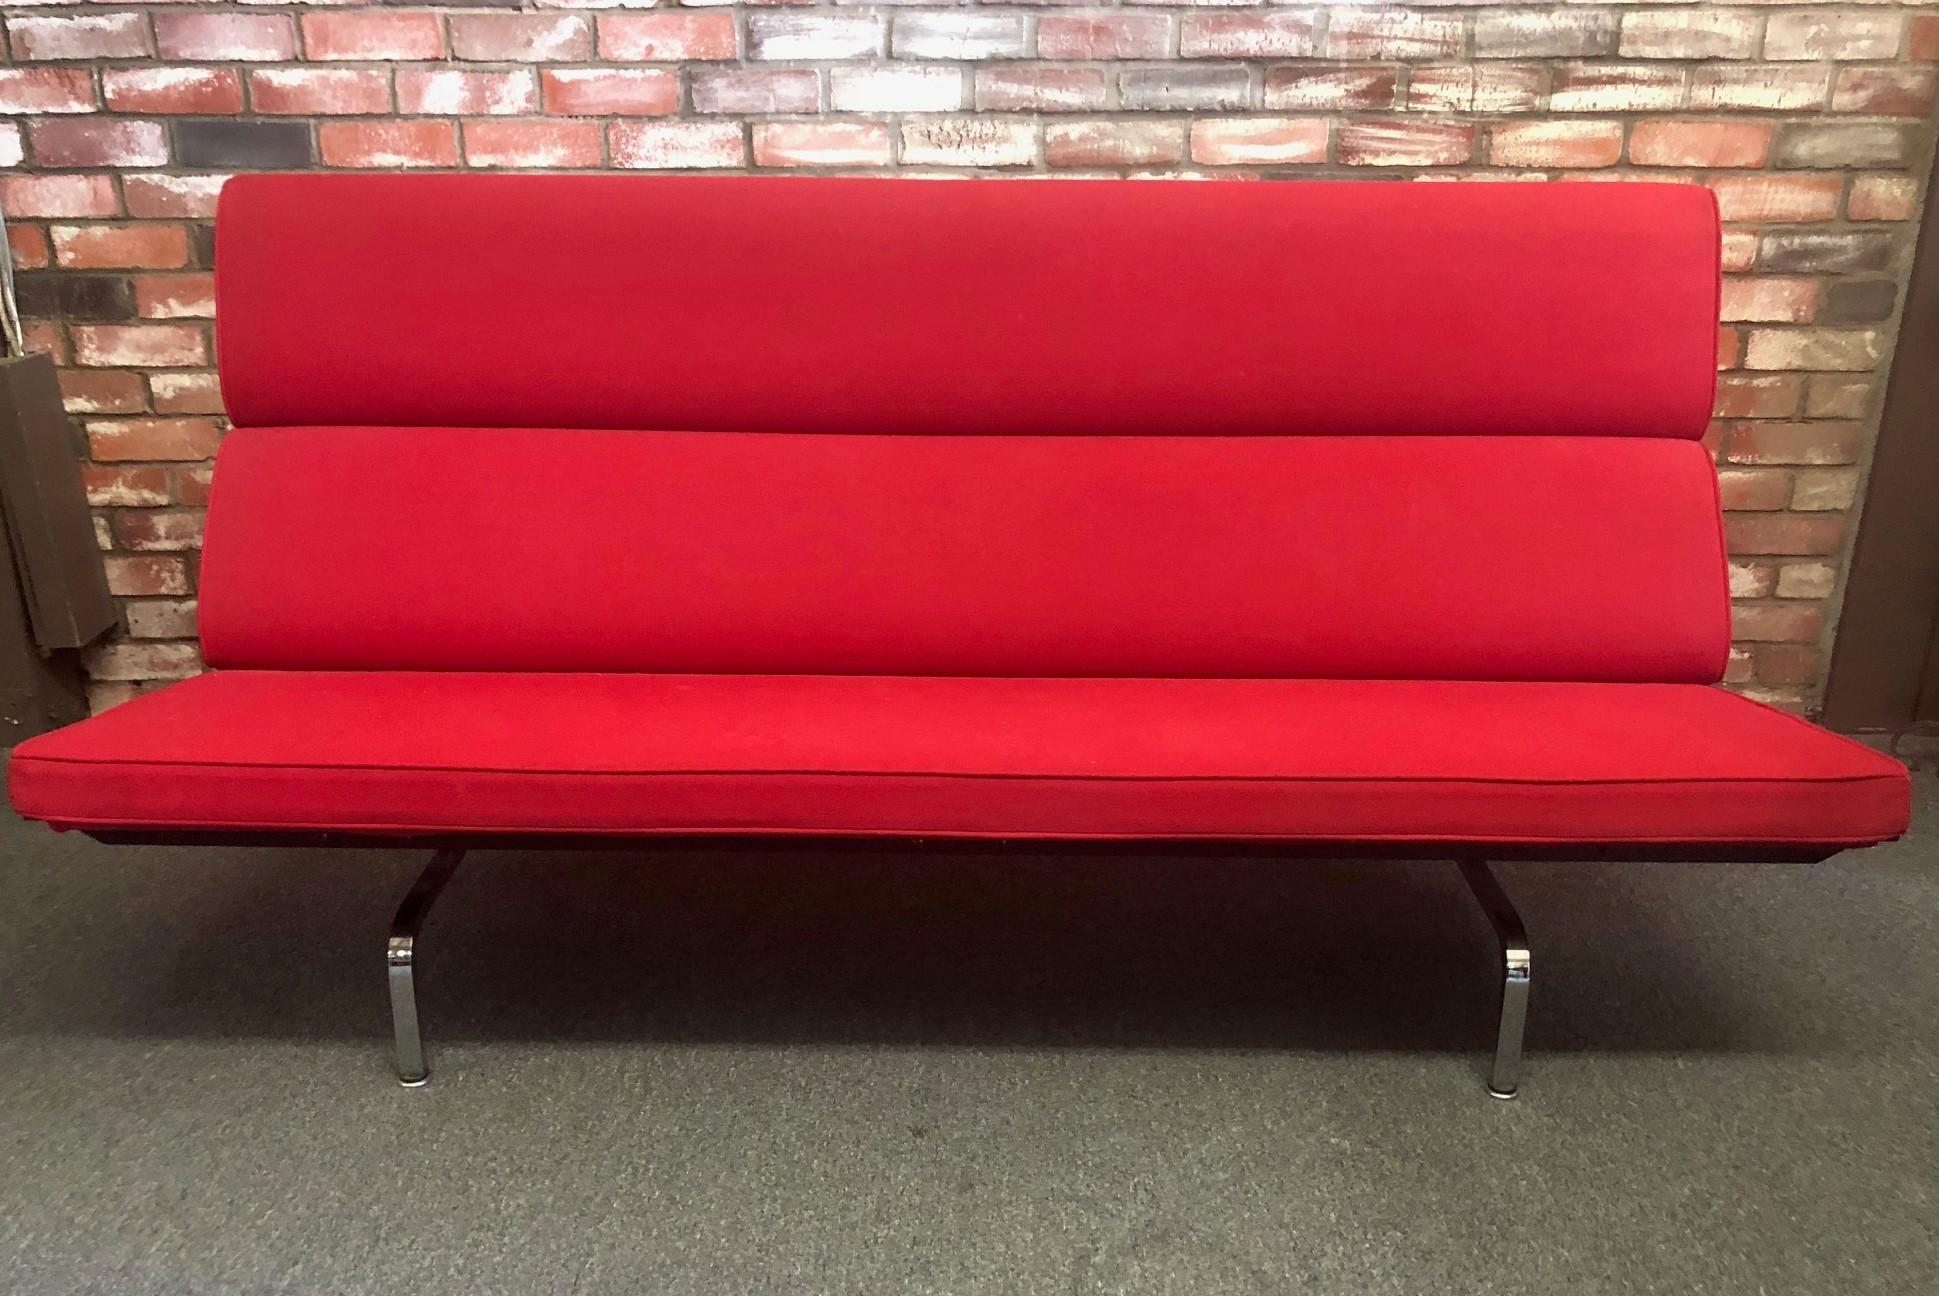 A very nice sofa compact in red fabric by Charles & Ray Eames for Herman Miller, circa 2001. The sofa sits on an airy pedestal of chromed-steel legs and has plush foam cushions which are supported by resilient webbing that provides firm but flexible